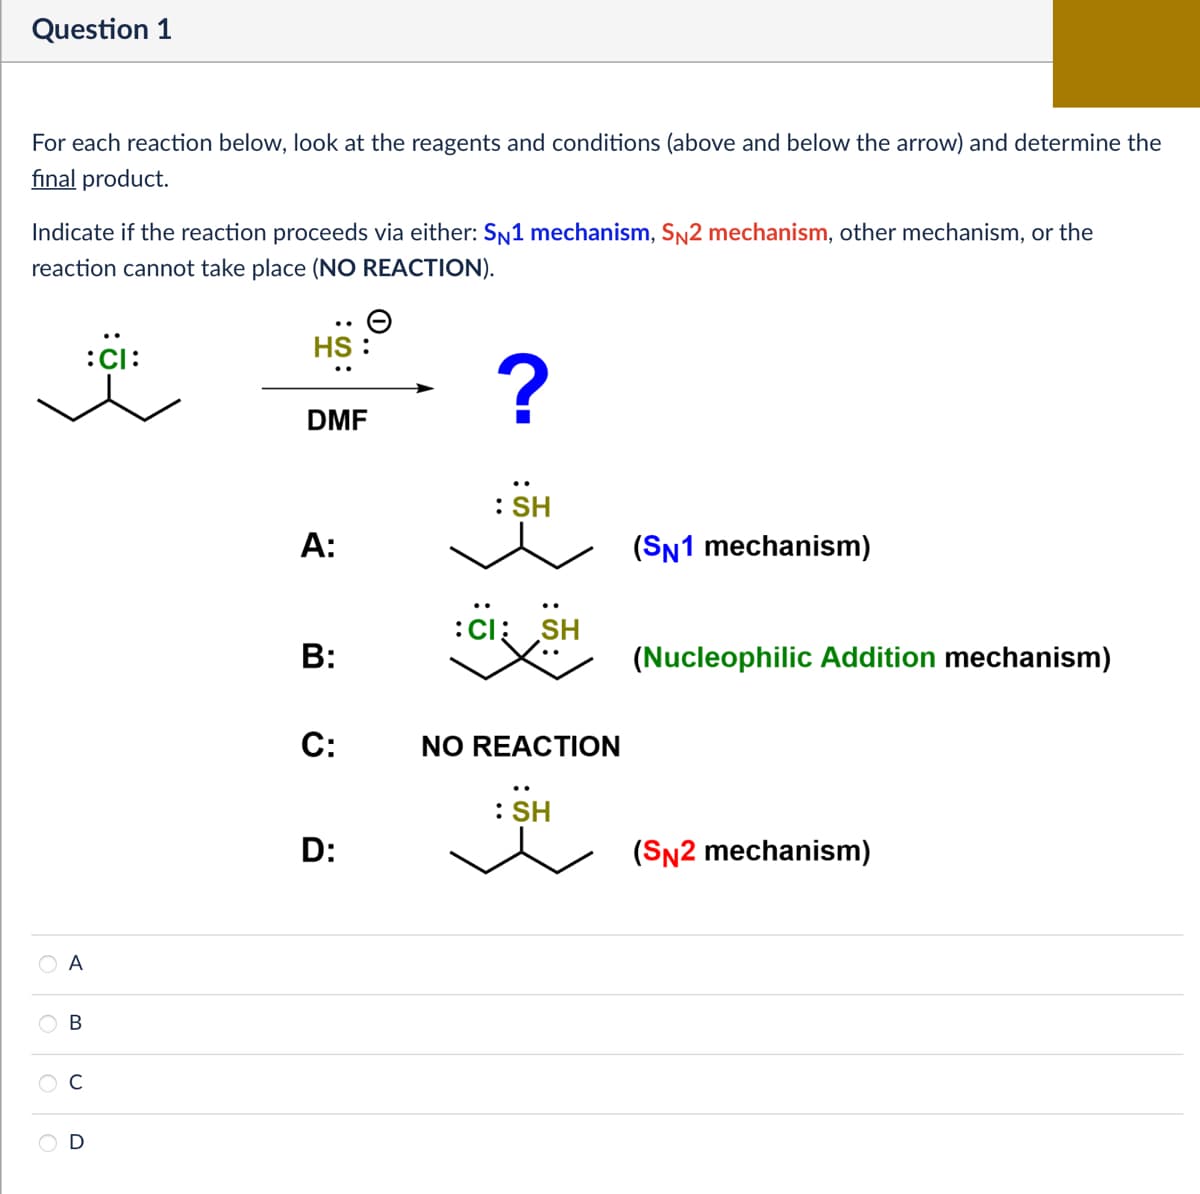 Question 1
For each reaction below, look at the reagents and conditions (above and below the arrow) and determine the
final product.
Indicate if the reaction proceeds via either: SN1 mechanism, SN2 mechanism, other mechanism, or the
reaction cannot take place (NO REACTION).
:C:
A
B
C
D
HS :
?
DMF
A:
B:
C:
D:
: SH
CI SH
NO REACTION
: SH
(SN1 mechanism)
(Nucleophilic Addition mechanism)
(SN2 mechanism)